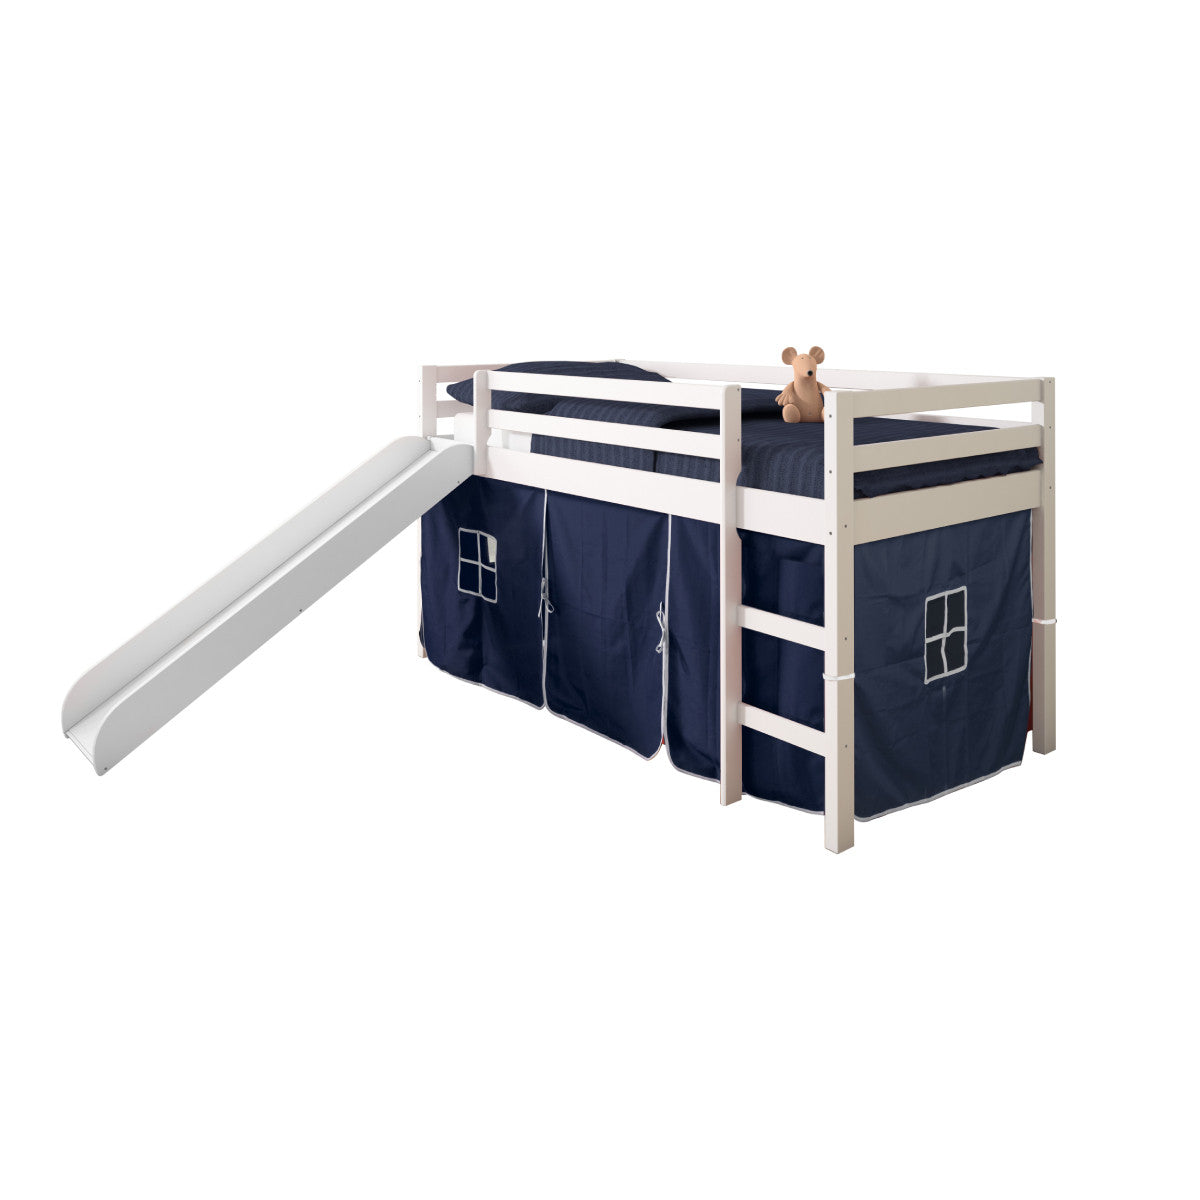 TENT BED WHITE W/BLUE TENT KIT